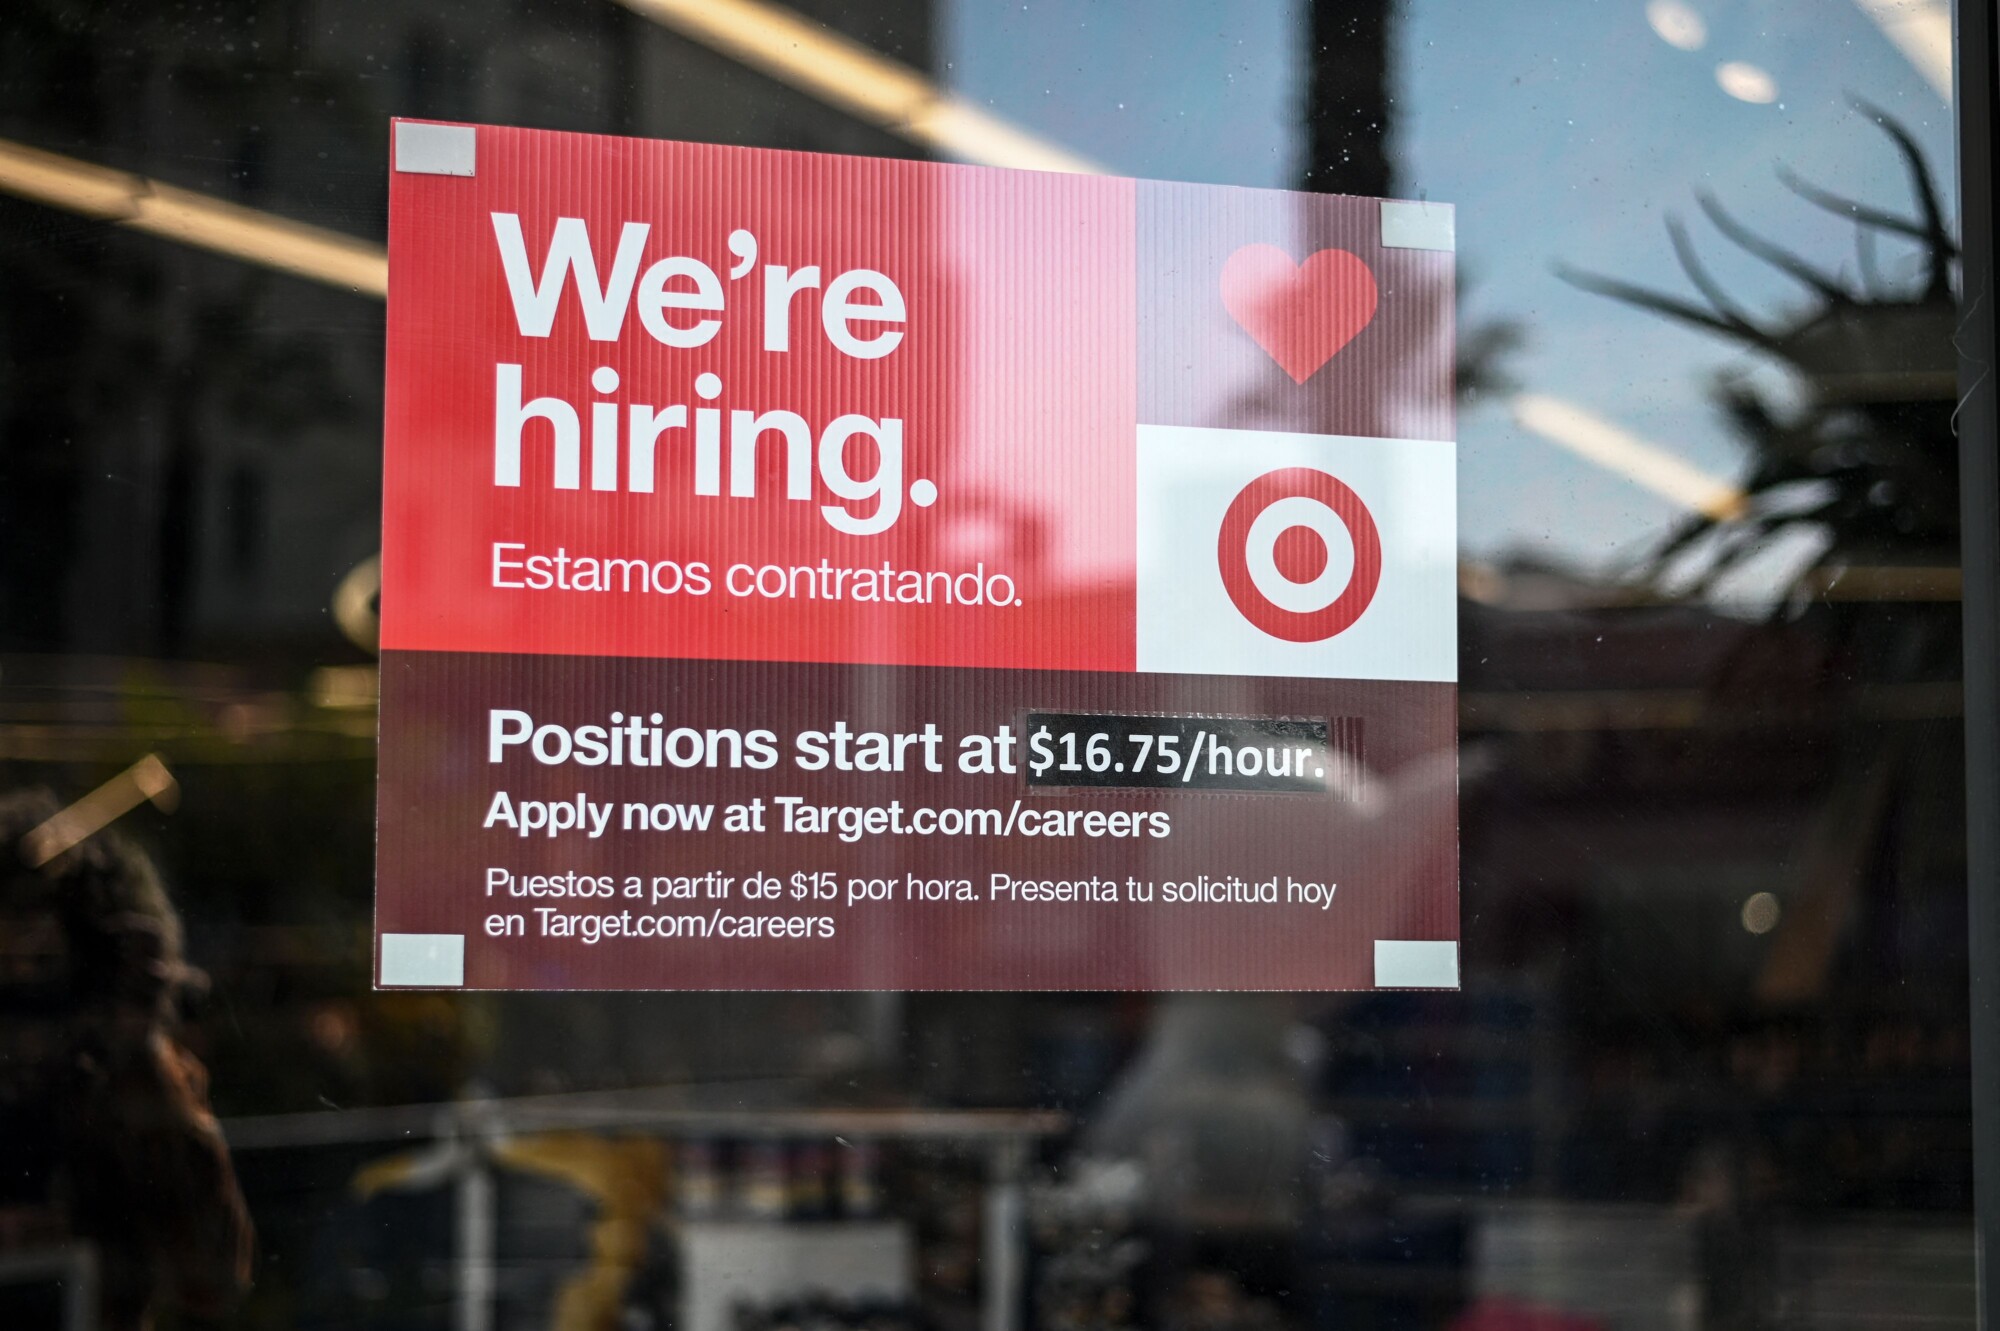 US Jobless Claims Fall as Labor Market Remains Tight